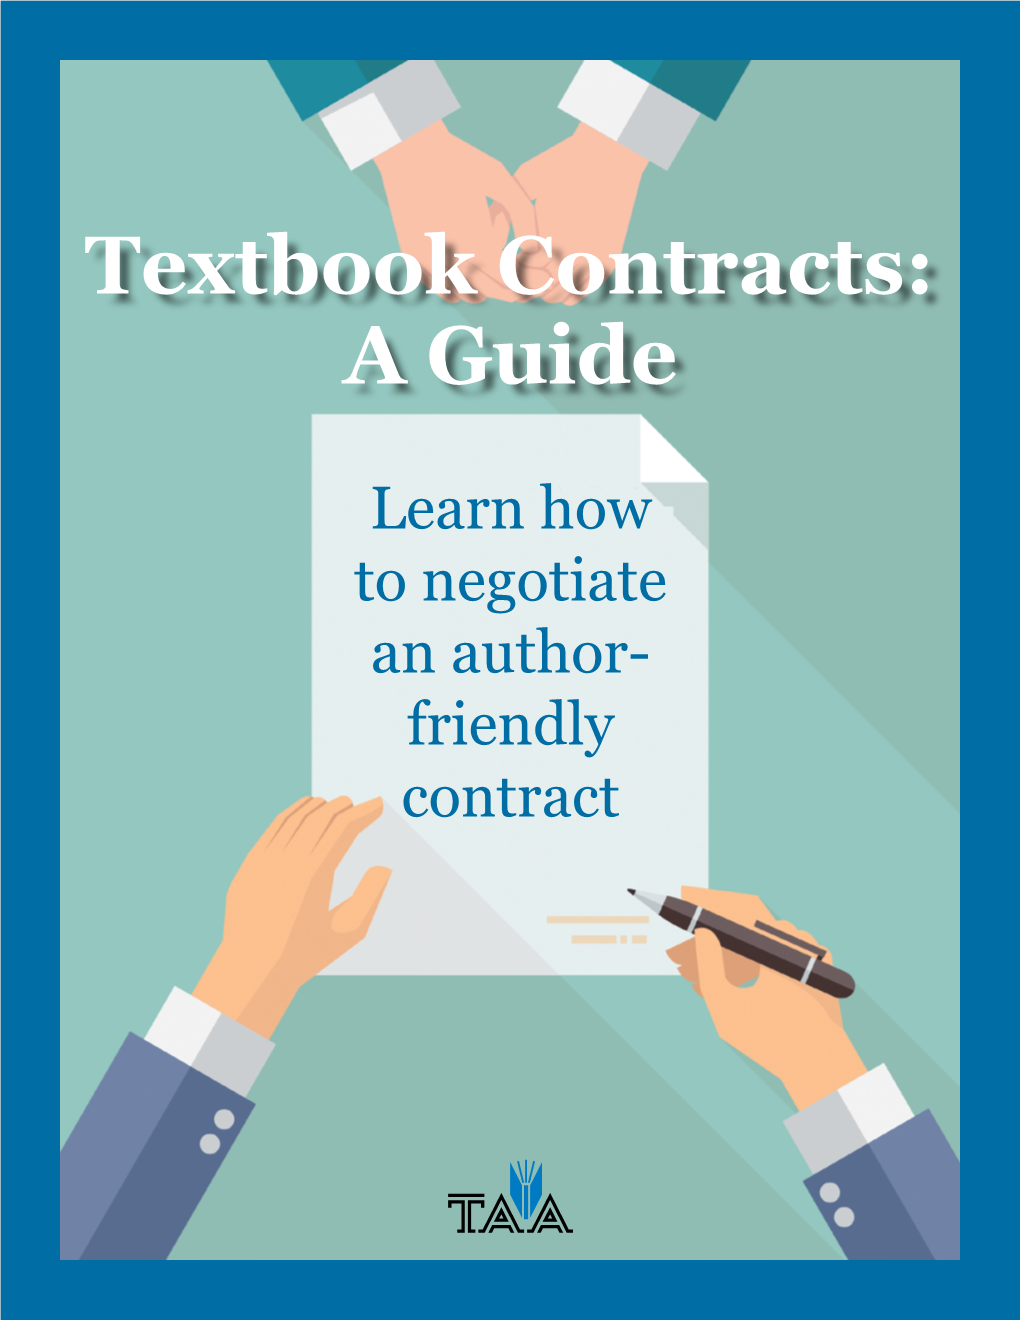 Textbook Contracts: Textbooka Guide Contracts: a Guide